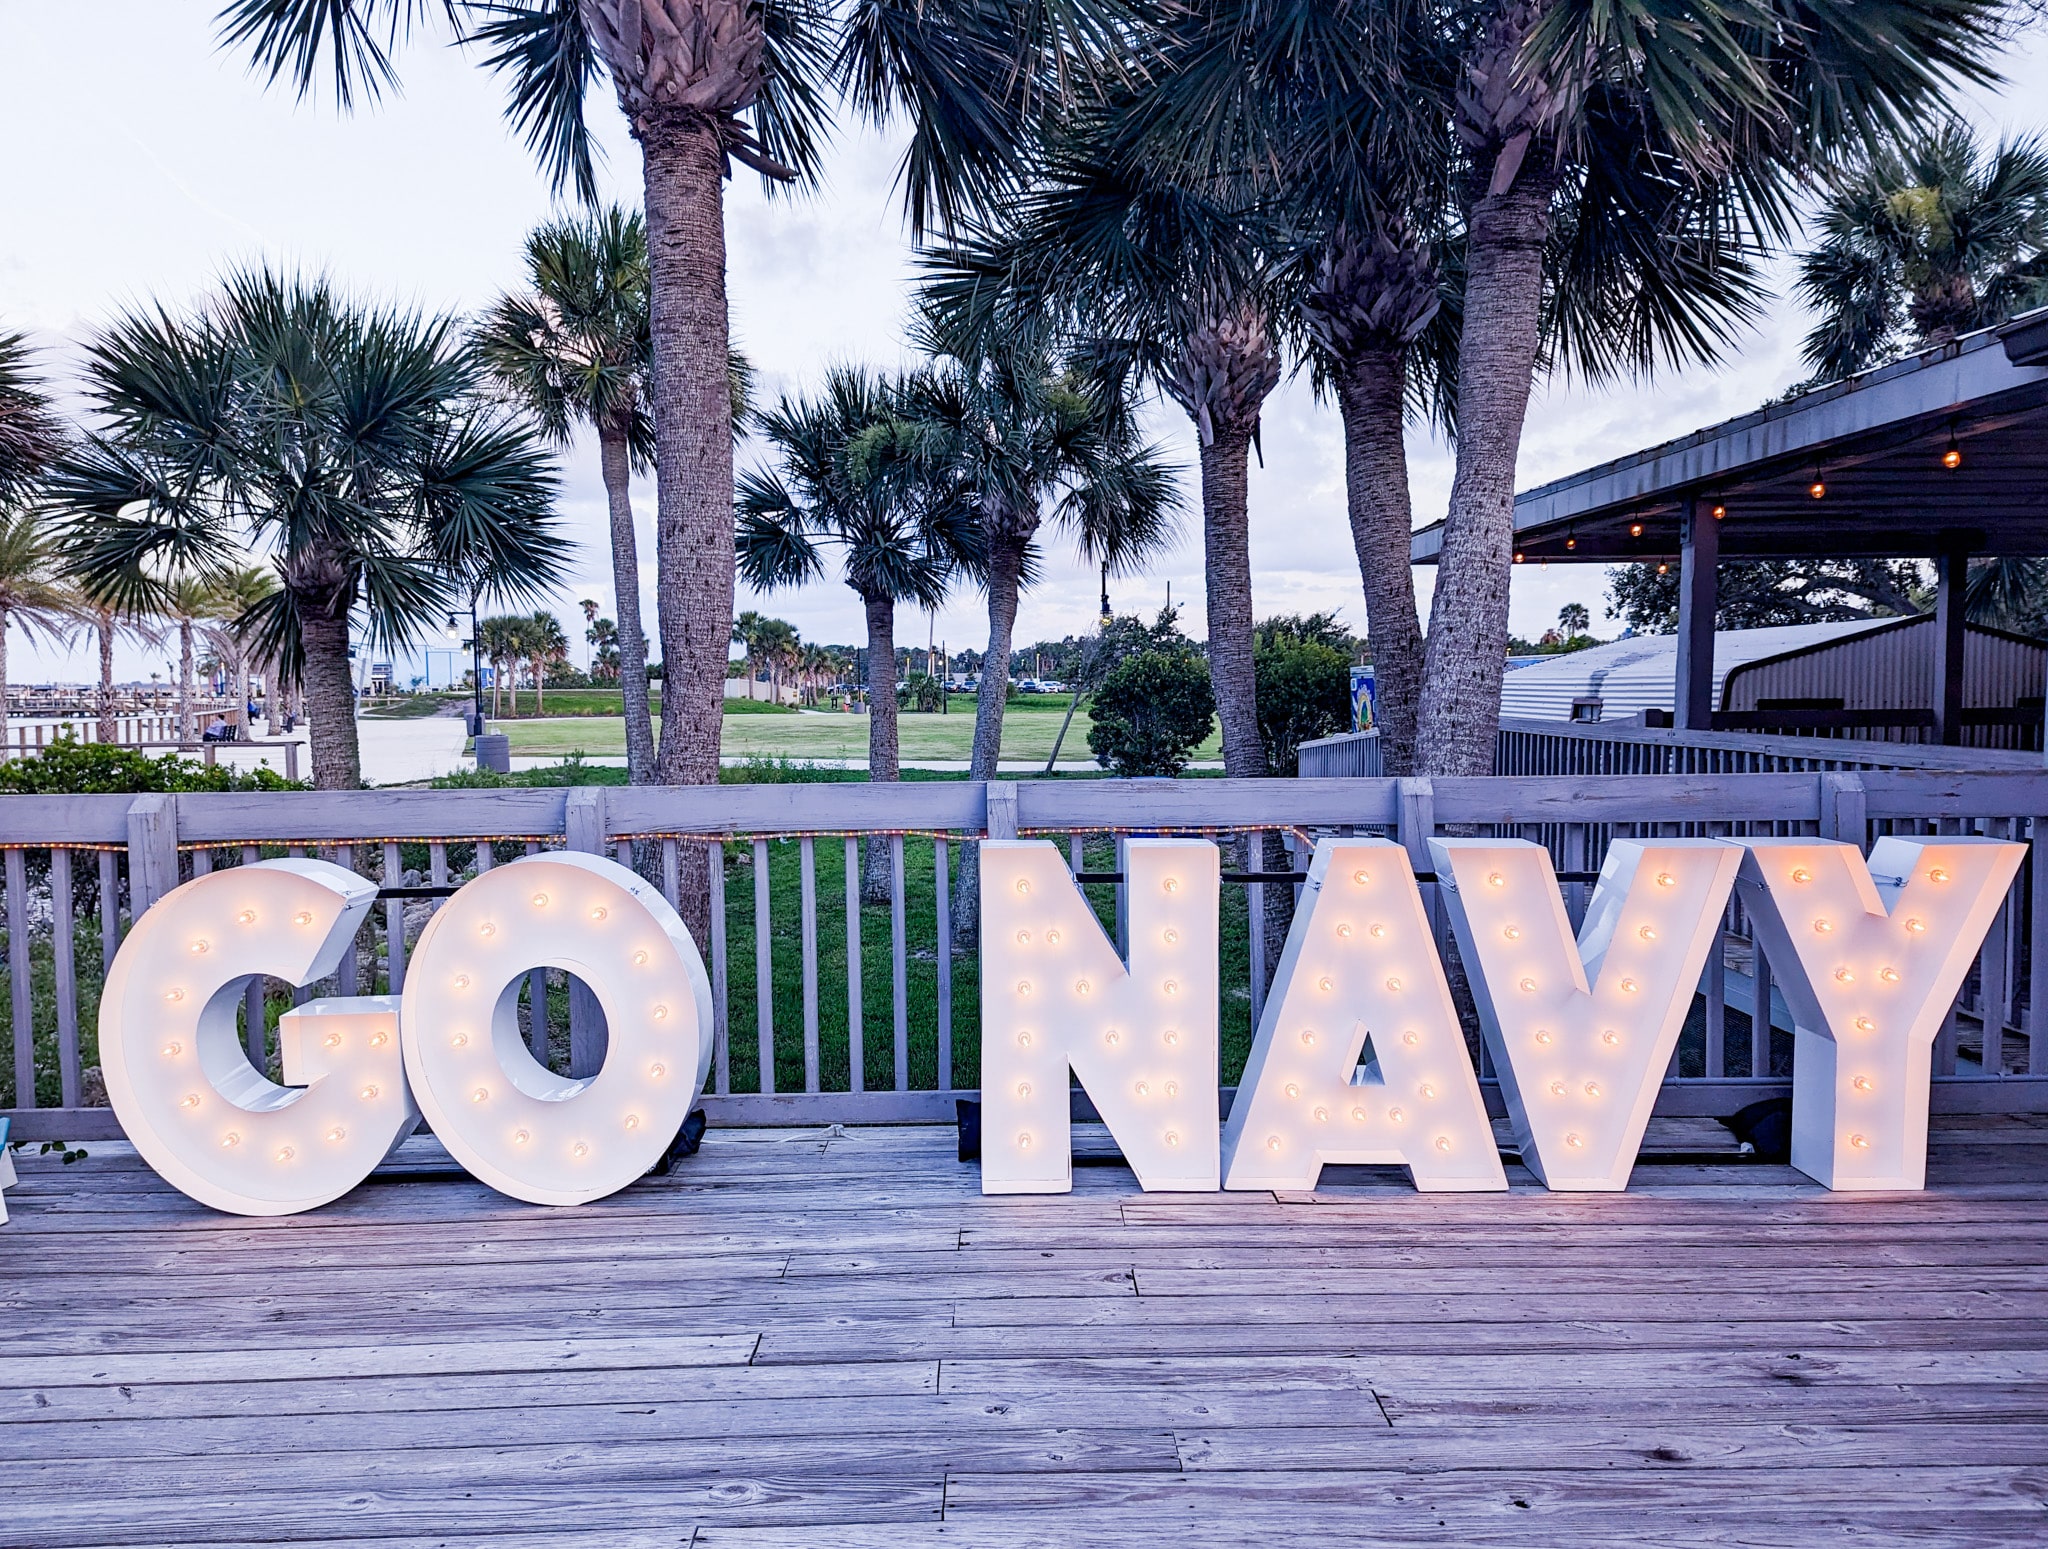 Light-Up Marquee Letters spelling out GO NAVY on a pier in Florida